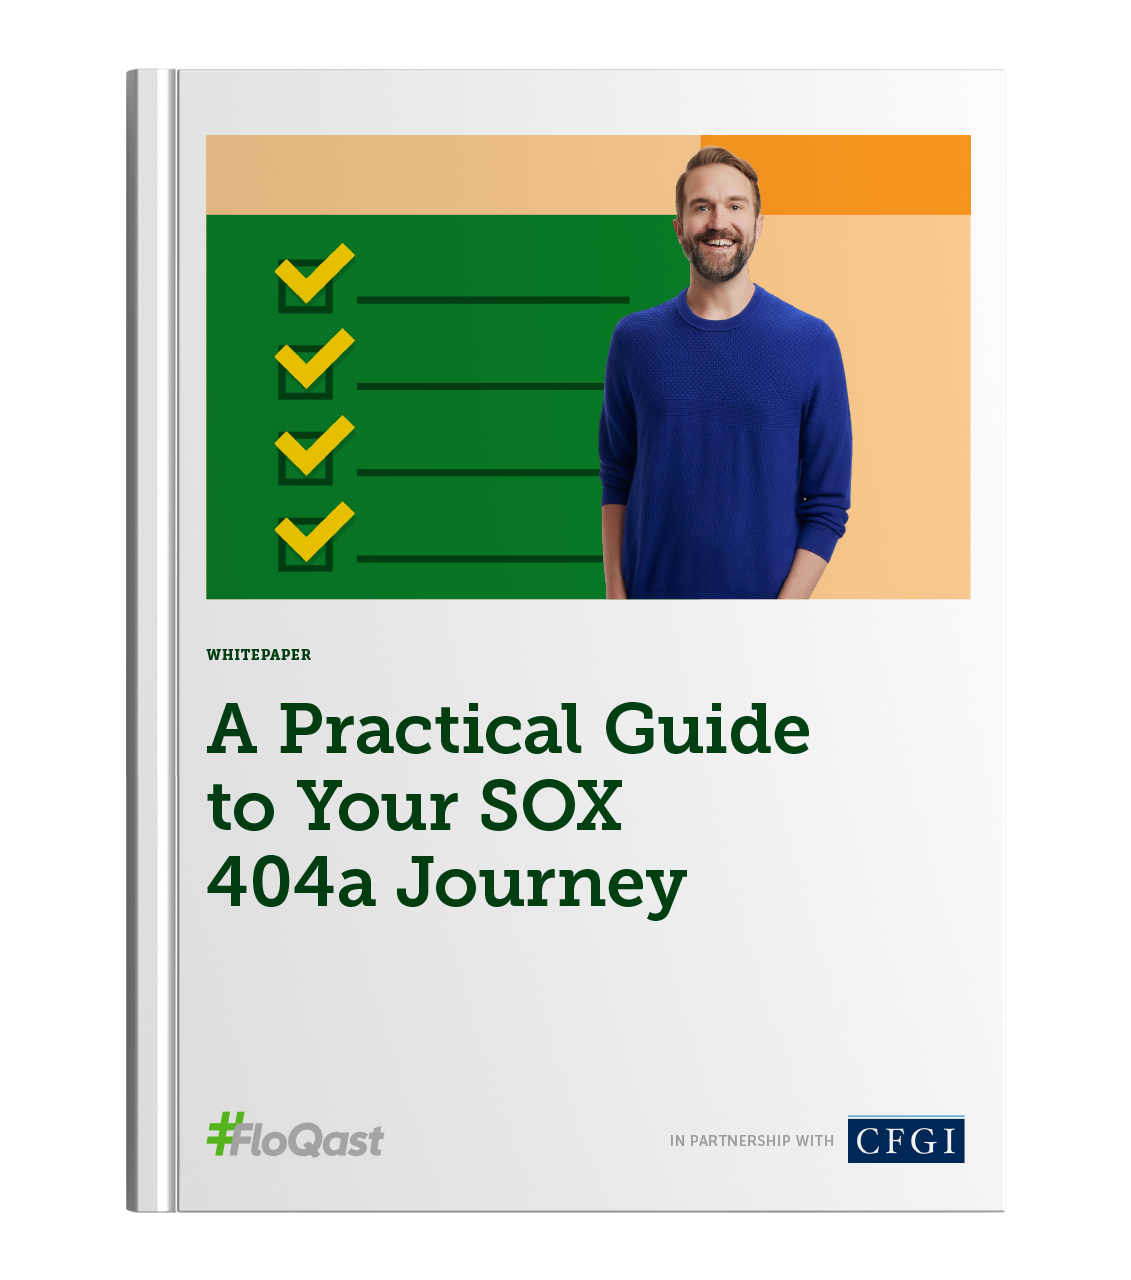 A Practical Guide to Your SOX 404x Journey